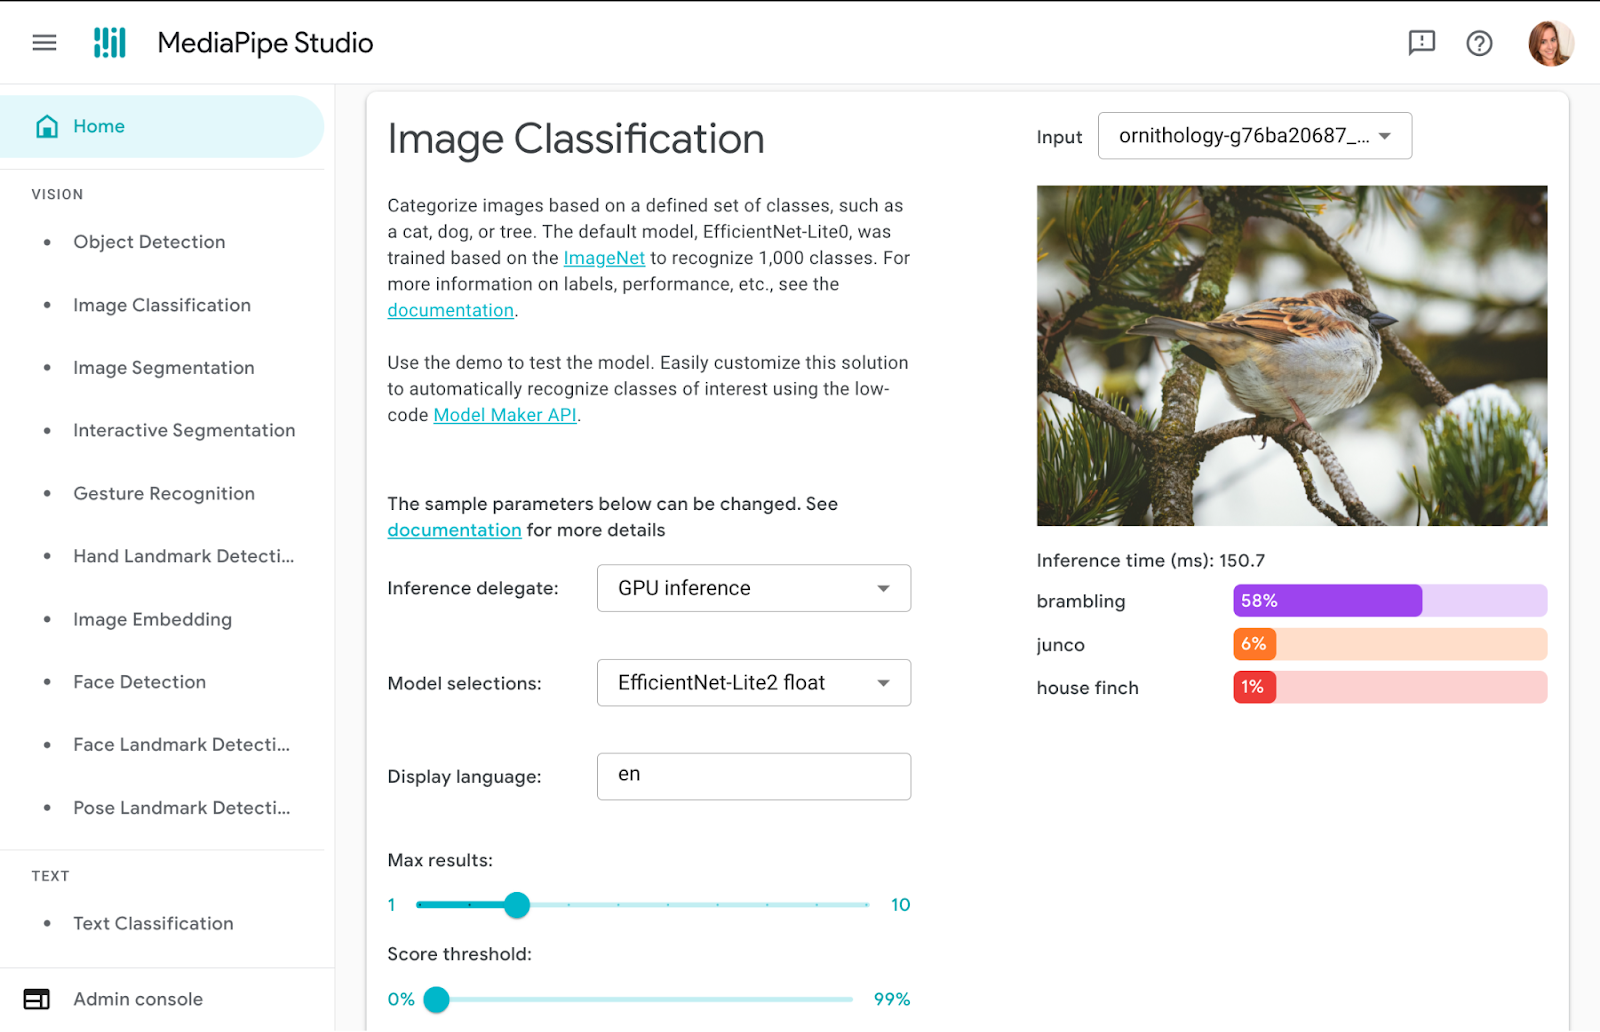 Screenshot of Image Classification page in MediaPipe Studio